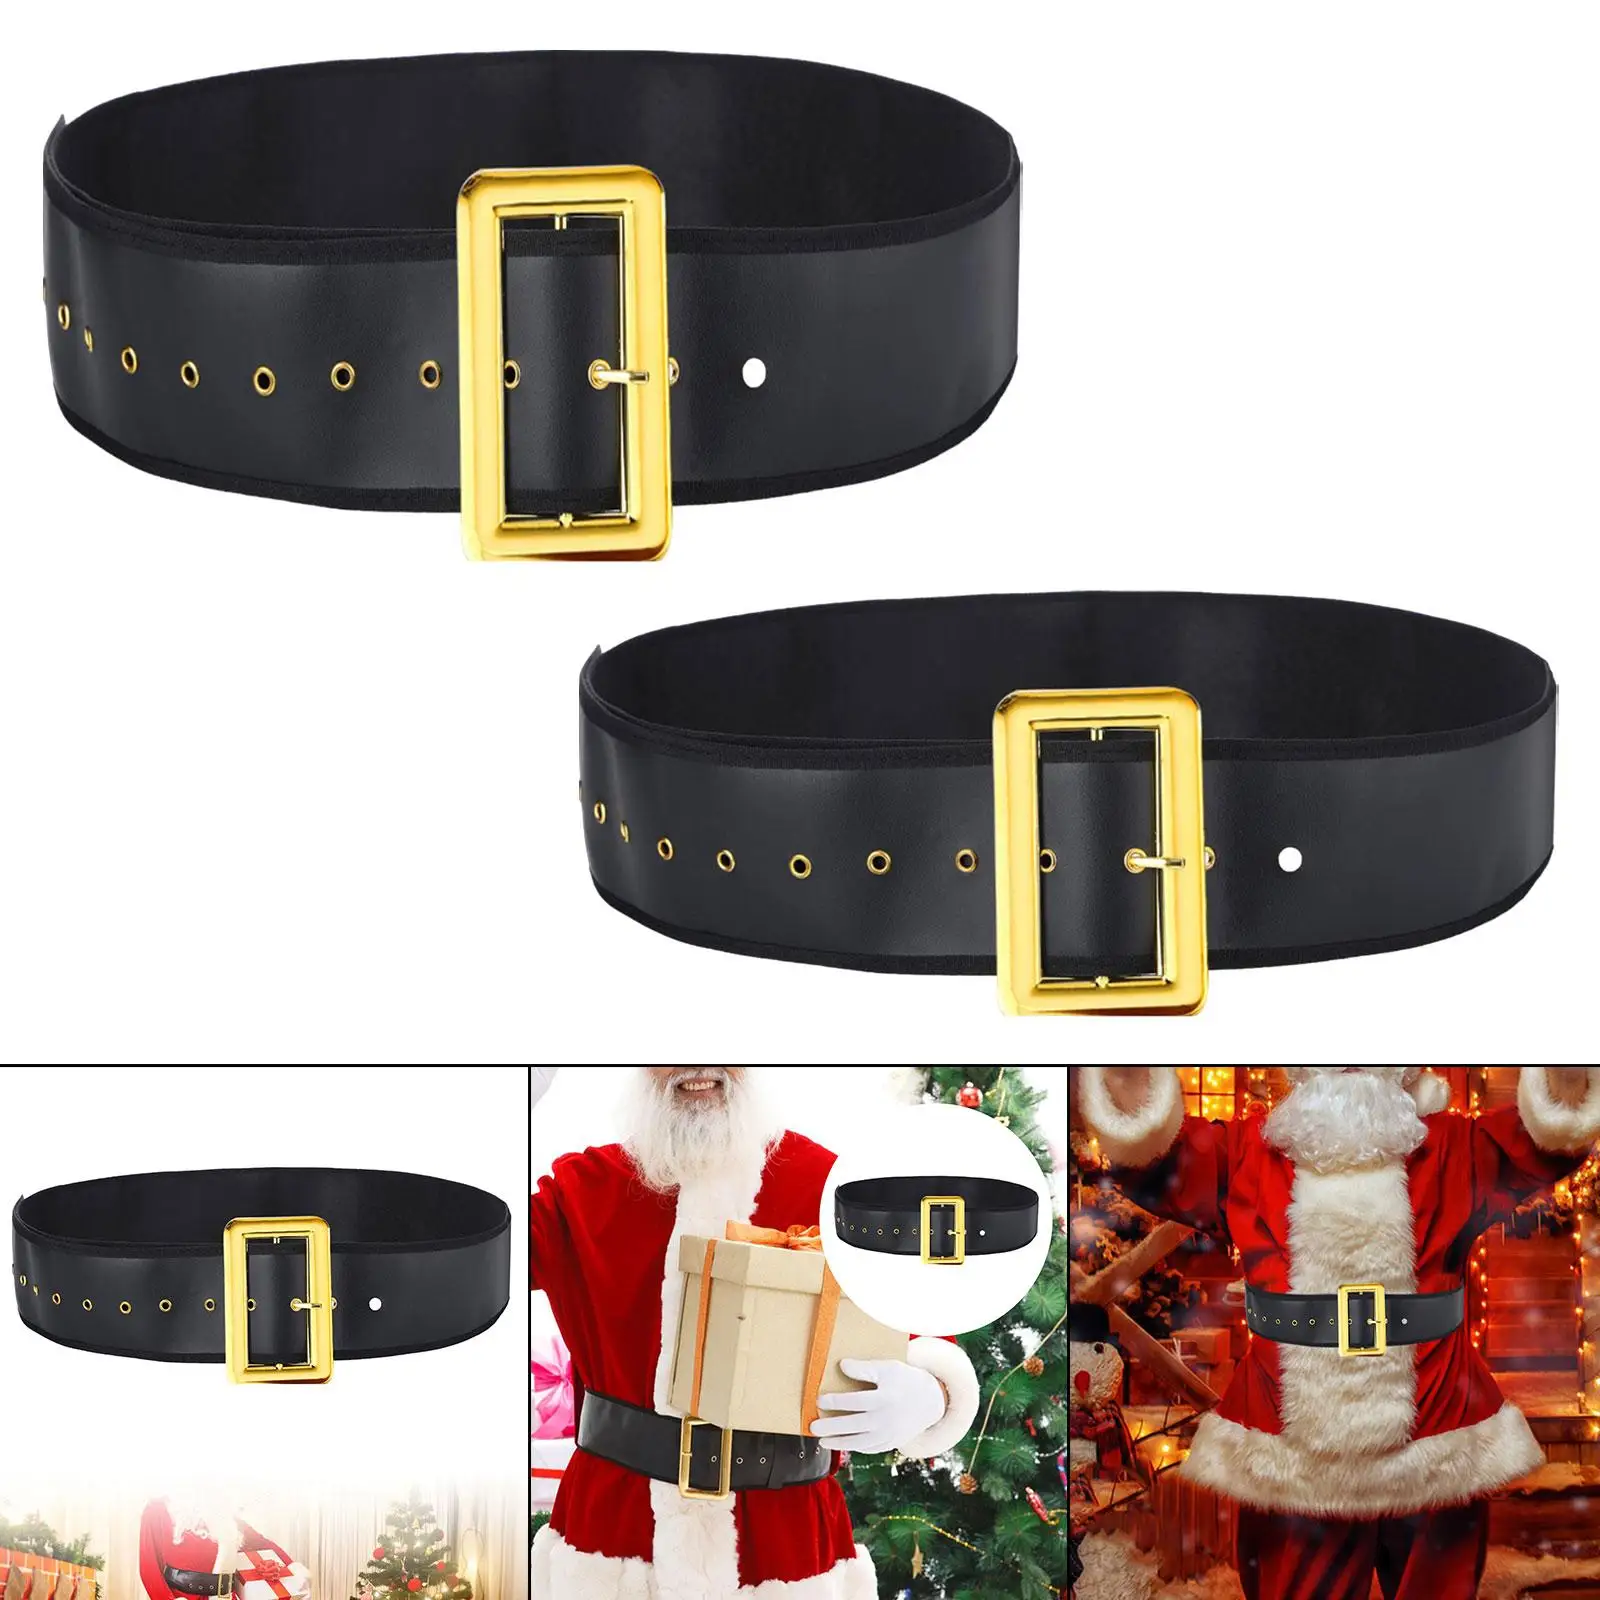 Christmas Santa Belt Costume Accessories PU Leather Santa Claus Belt for Stage Performance Dress up Masquerade Carnivals Adults